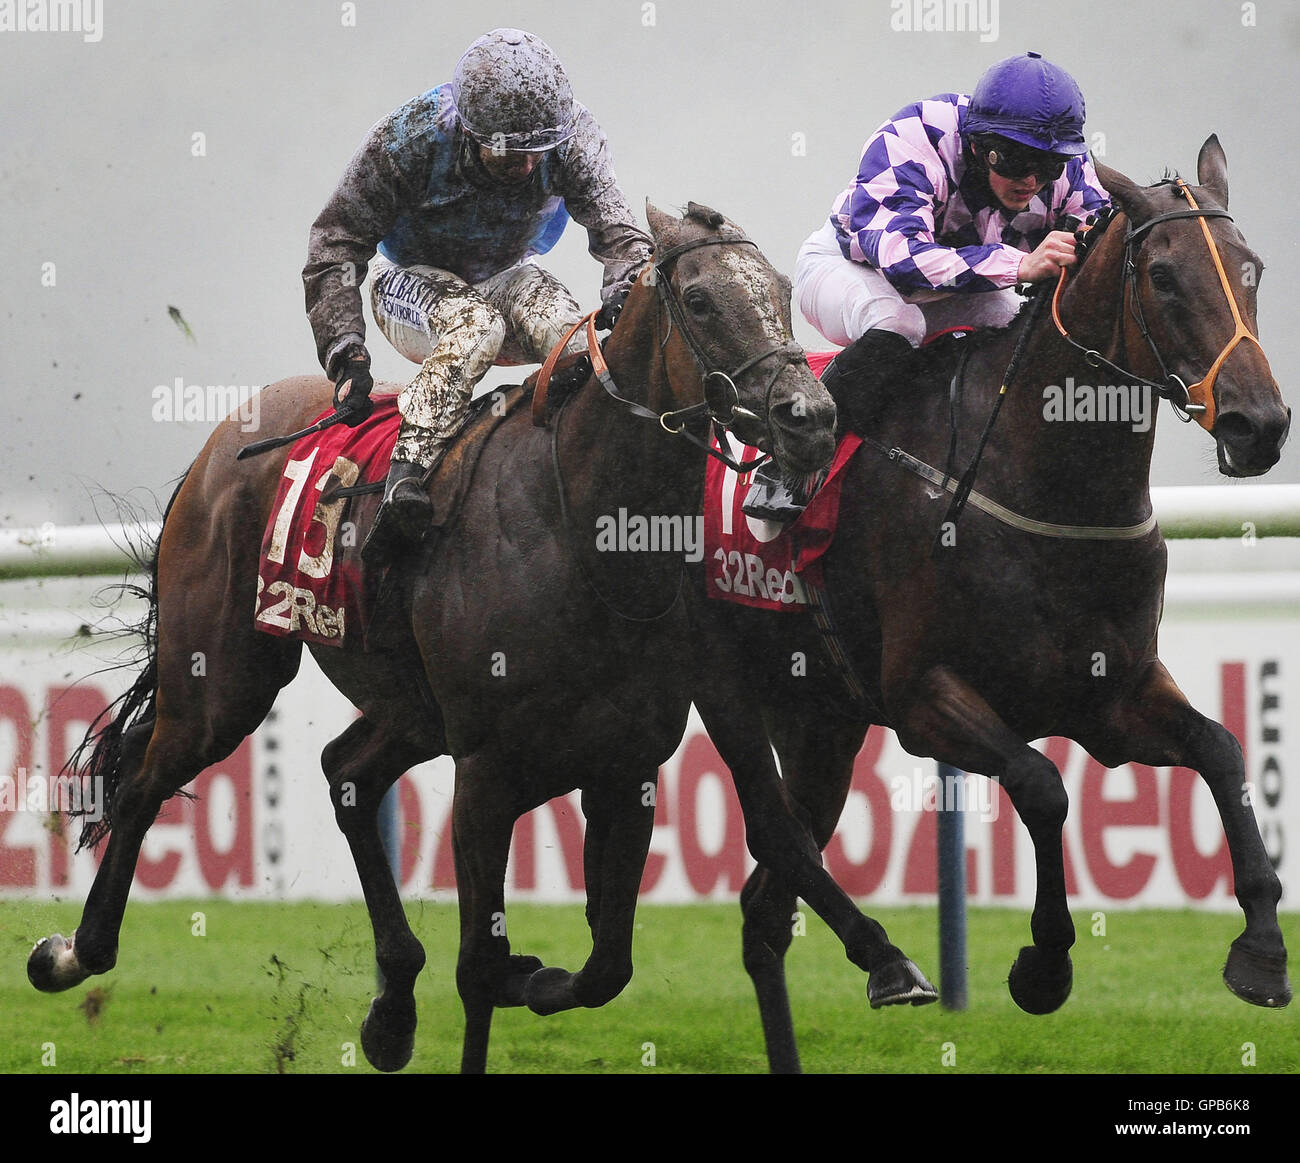 Intense Tango ridden by Clifford Lee (right) beats Montaly ridden by Oisin Murphy to win the 32 Red Casino Handicap at Haydock Racecouse. PRESS ASSOCIATION Photo. Picture date: Saturday September 3, 2016. See PA story RACING Haydock. Photo credit should read: John Giles/PA Wire Stock Photo